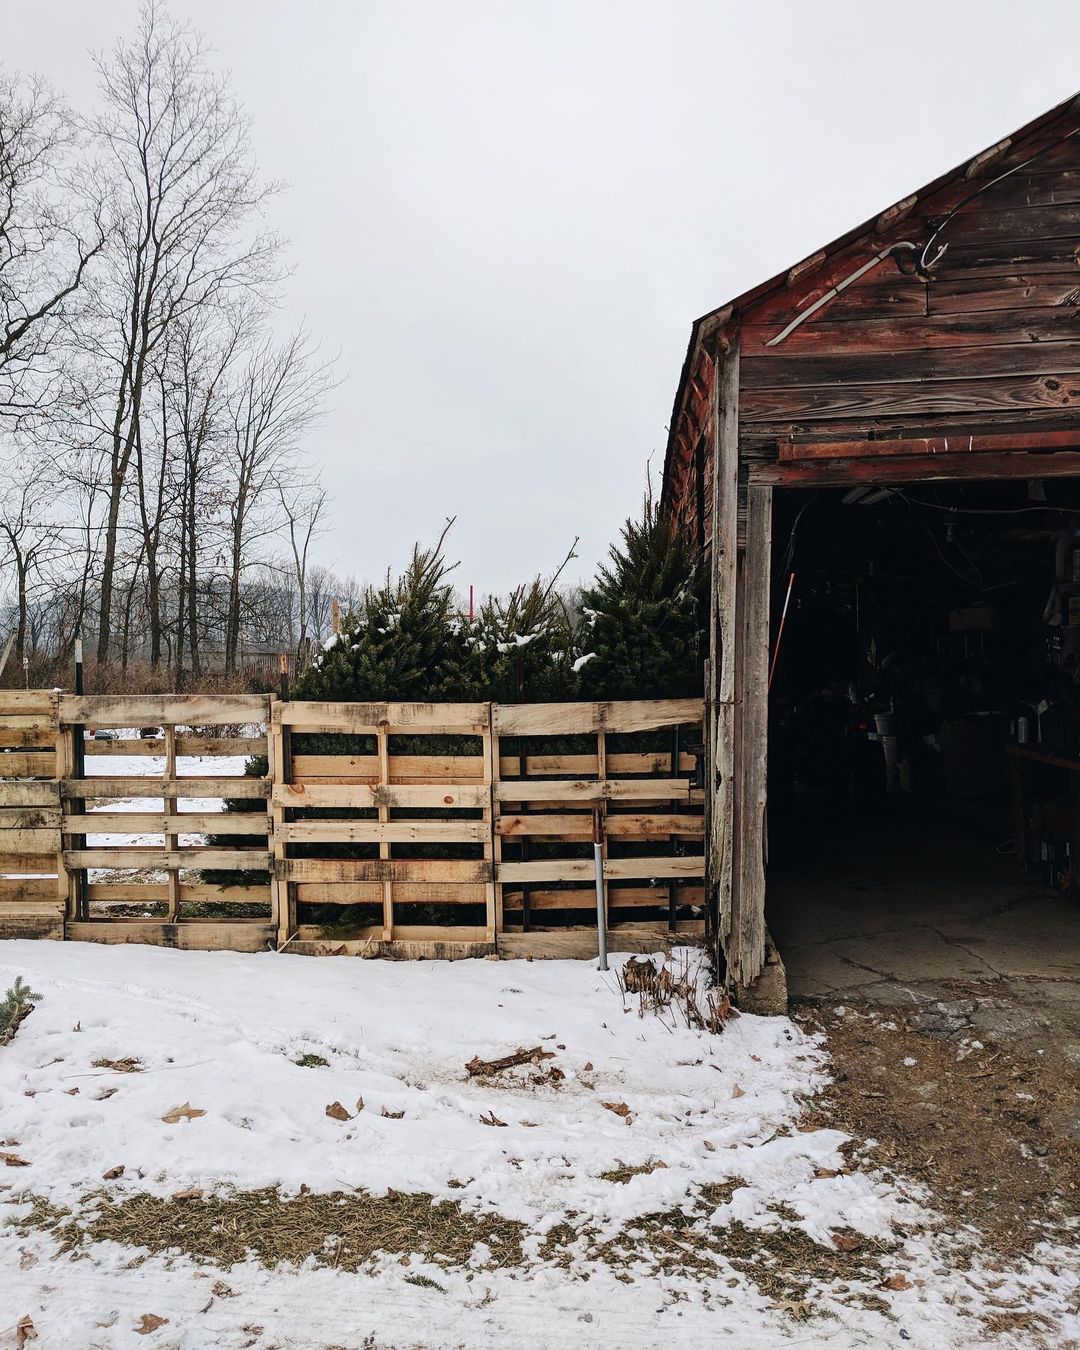 Centre County is home to more than one thousand farms and an agricultural history that dates back to the earliest days of Pennsylvania. It’s a history of hard work, a passion for growing things, and a love of the land and all things that come from it.
#H